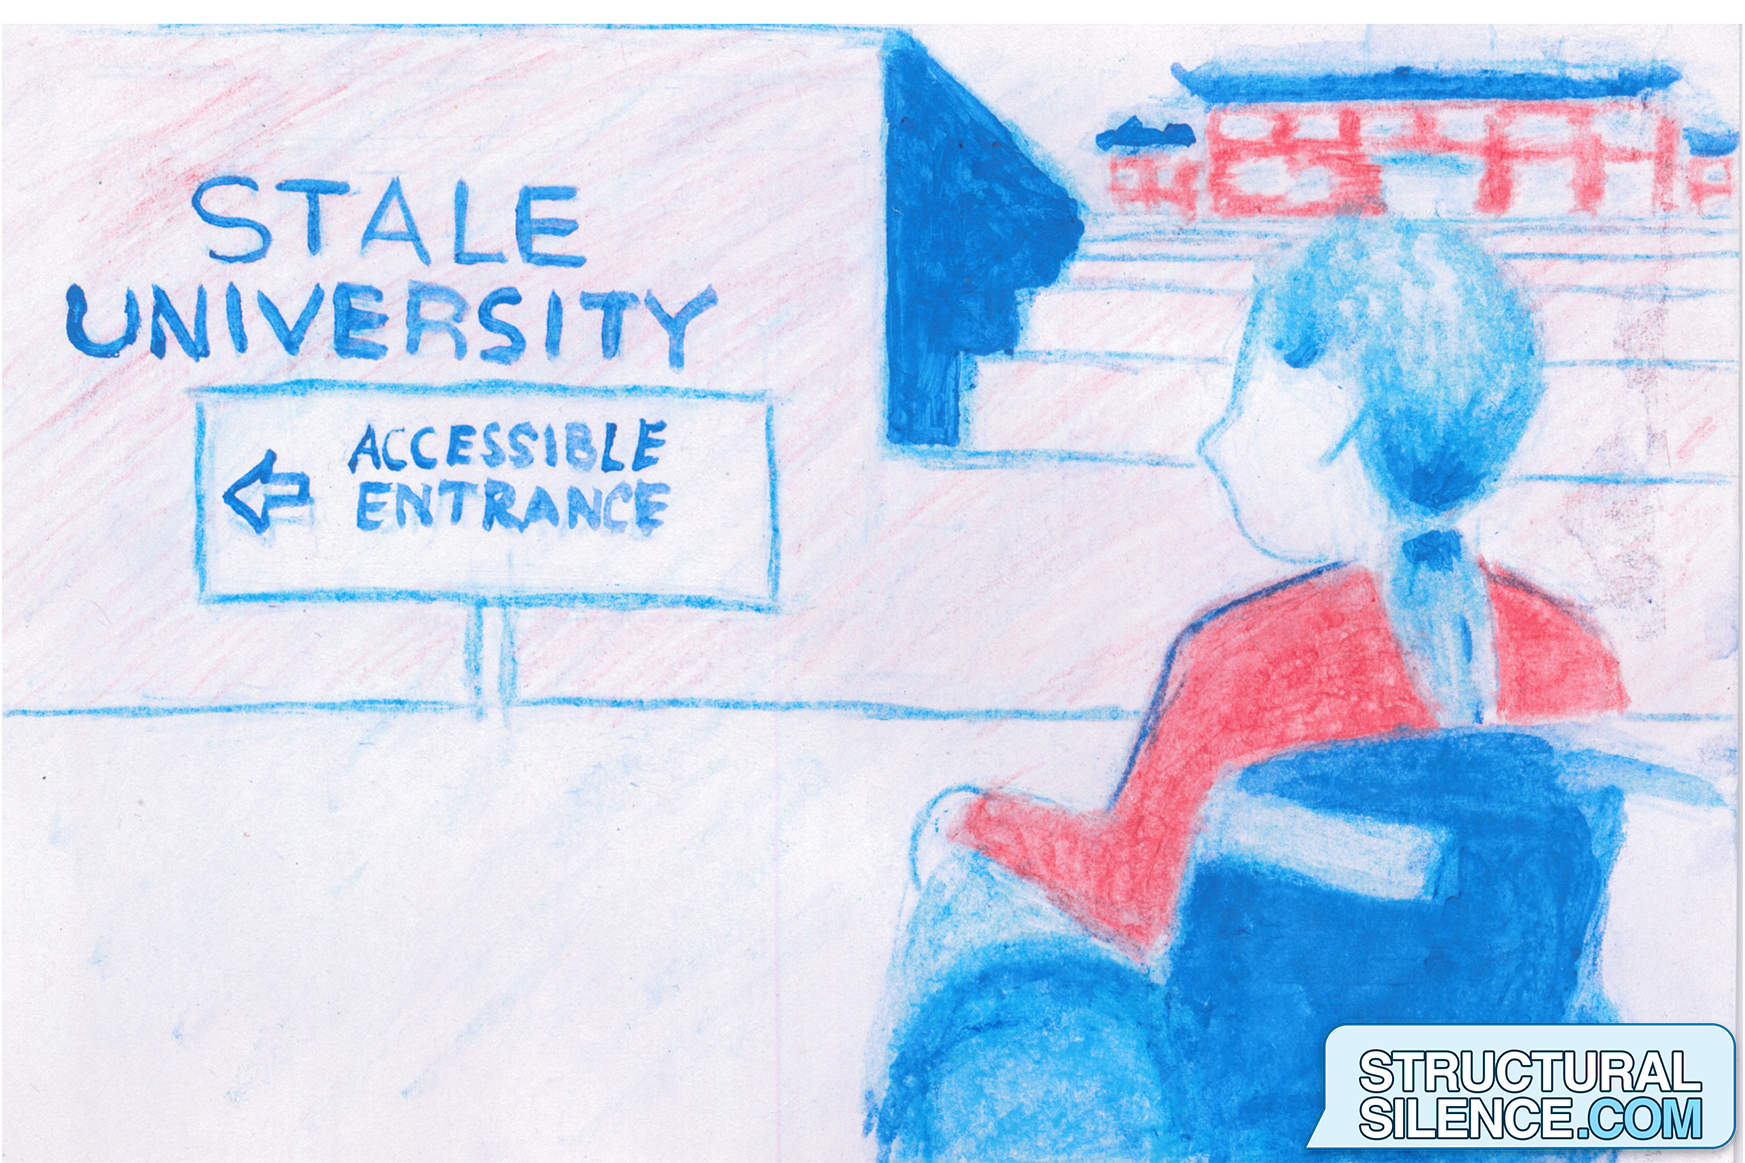 The wheelchaired character faces an "accessible entrance" sign in front of the steps, pointing to the left. 